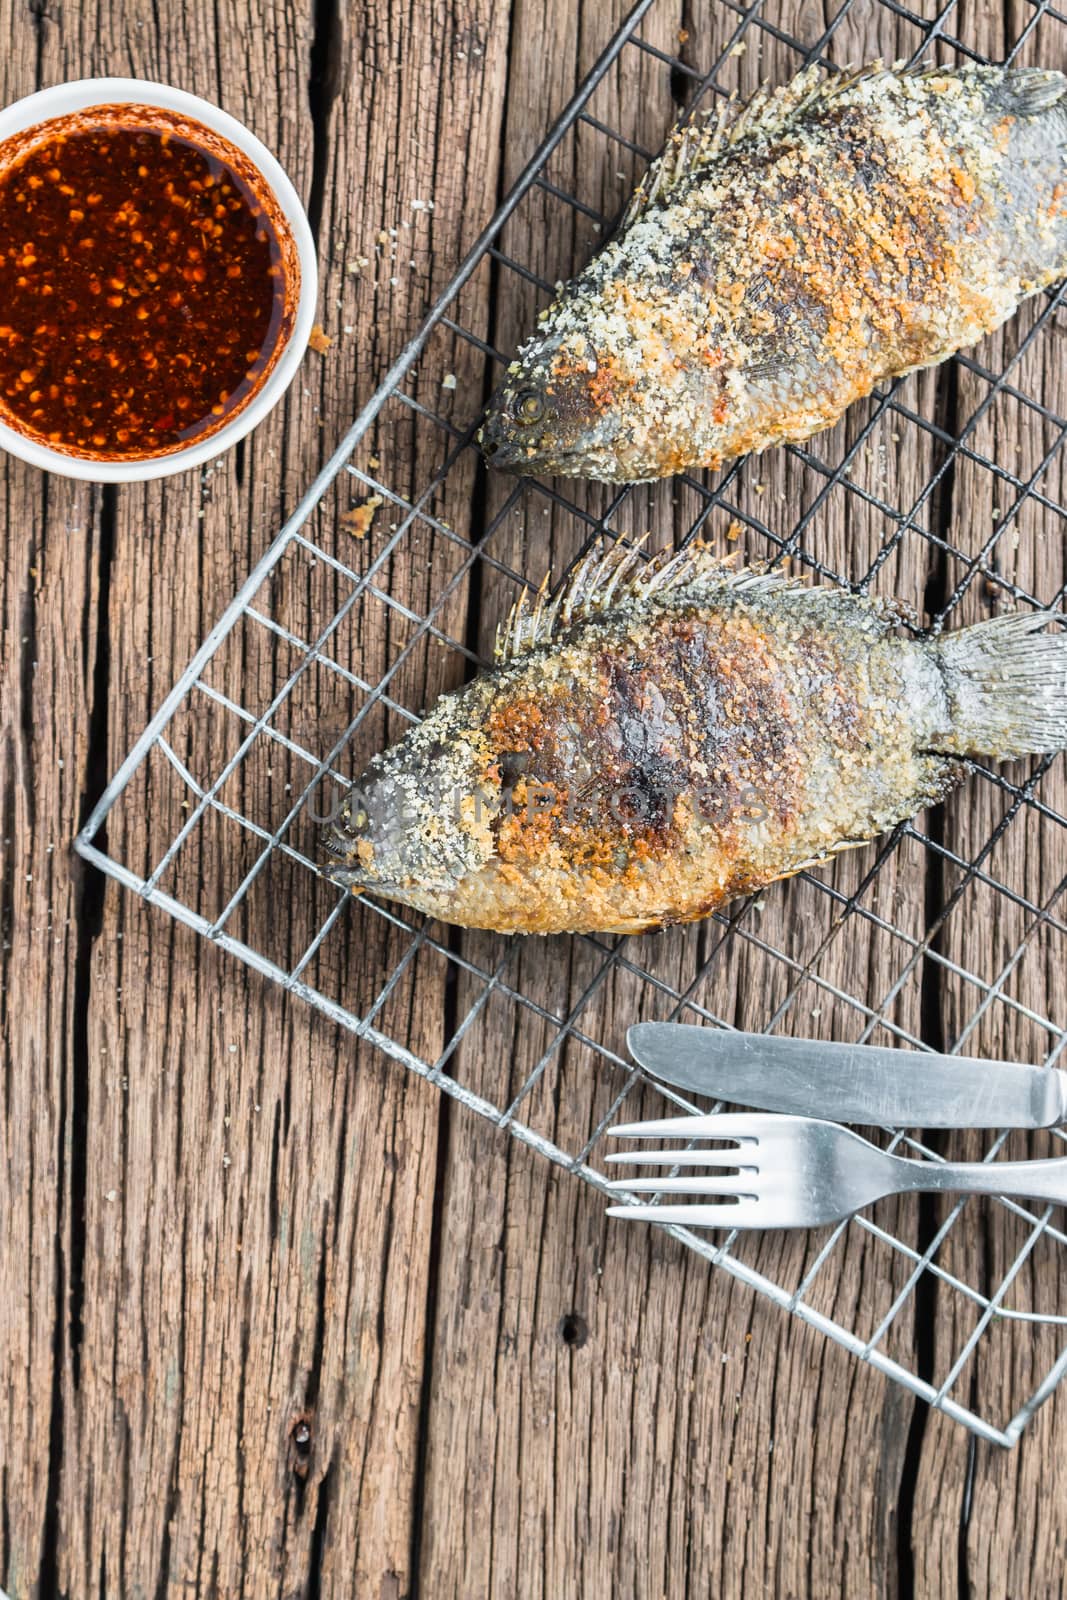 Fresh "Climbing perch" or "Climbing gourami" grilled with salt, Traditional Thai food